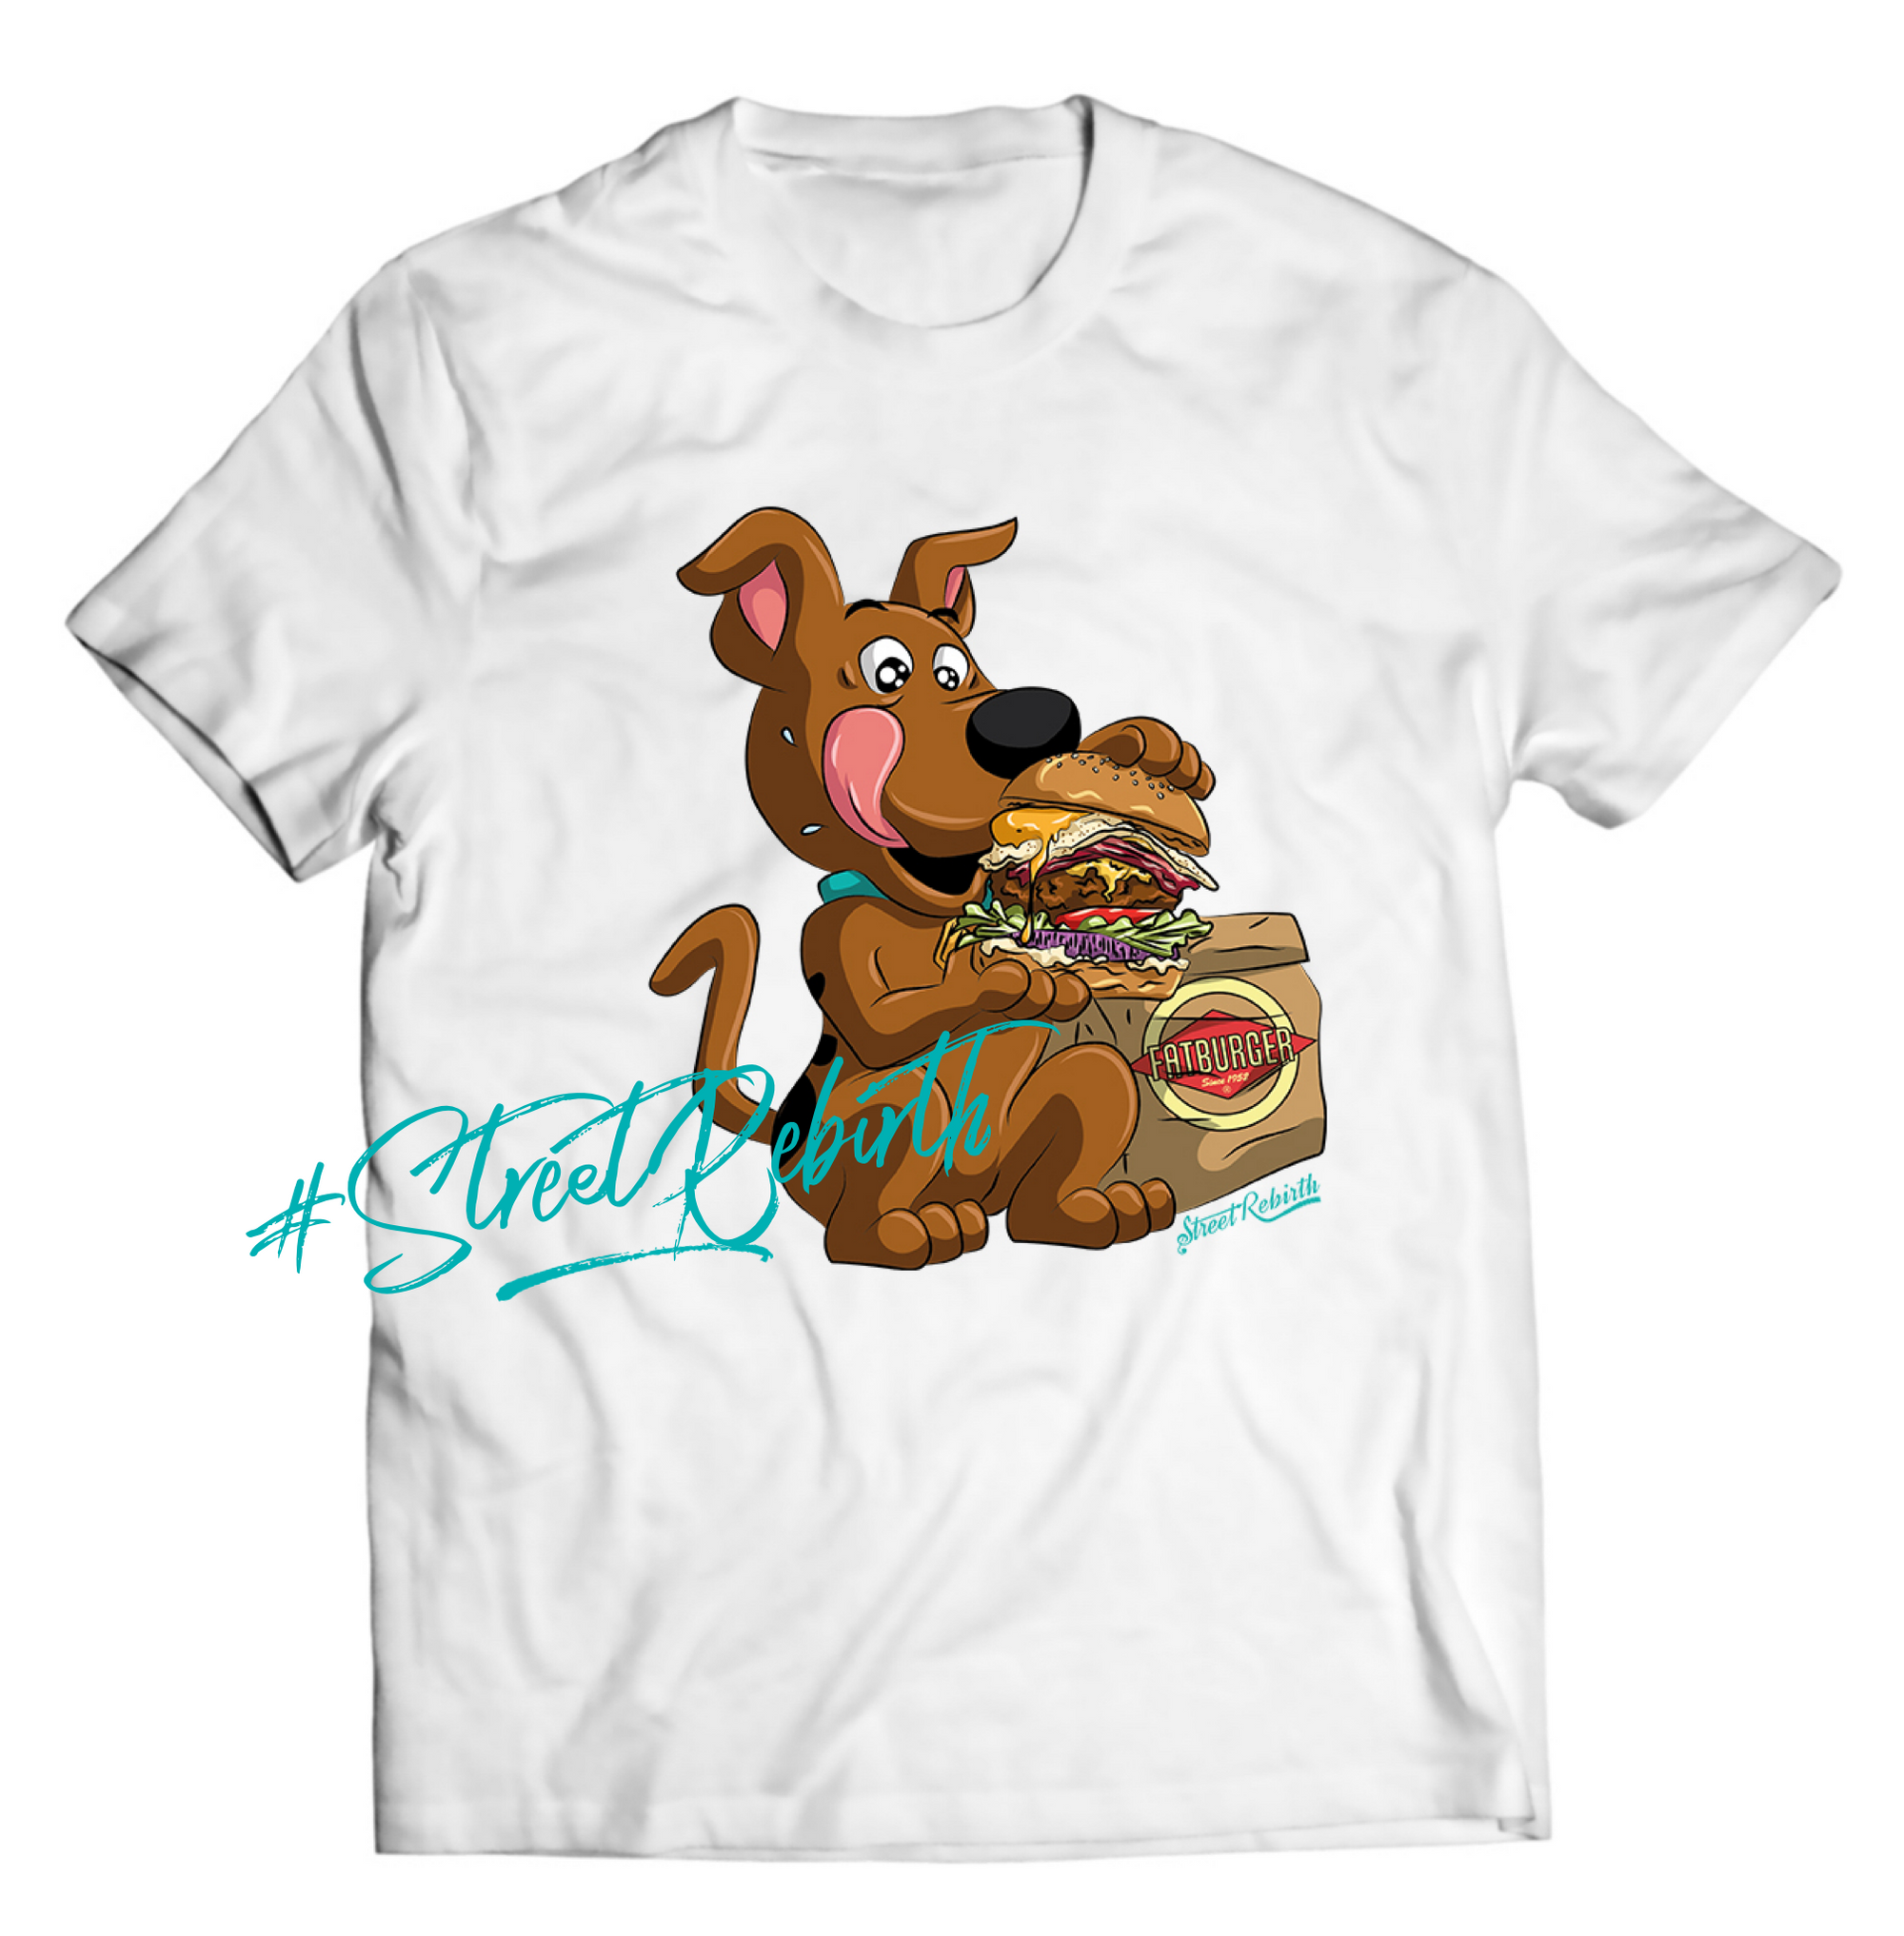 Eating Big Burger Shirt - Direct To Garment Quality Print - Unisex Shirt - Gift For Him or Her